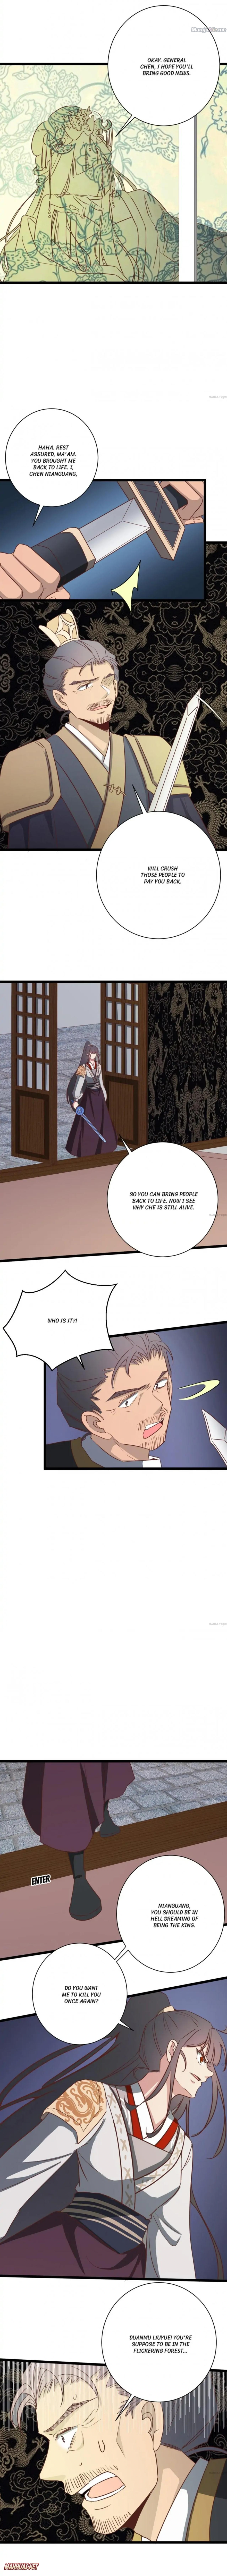 Fight For Her Gifted Son - Page 2